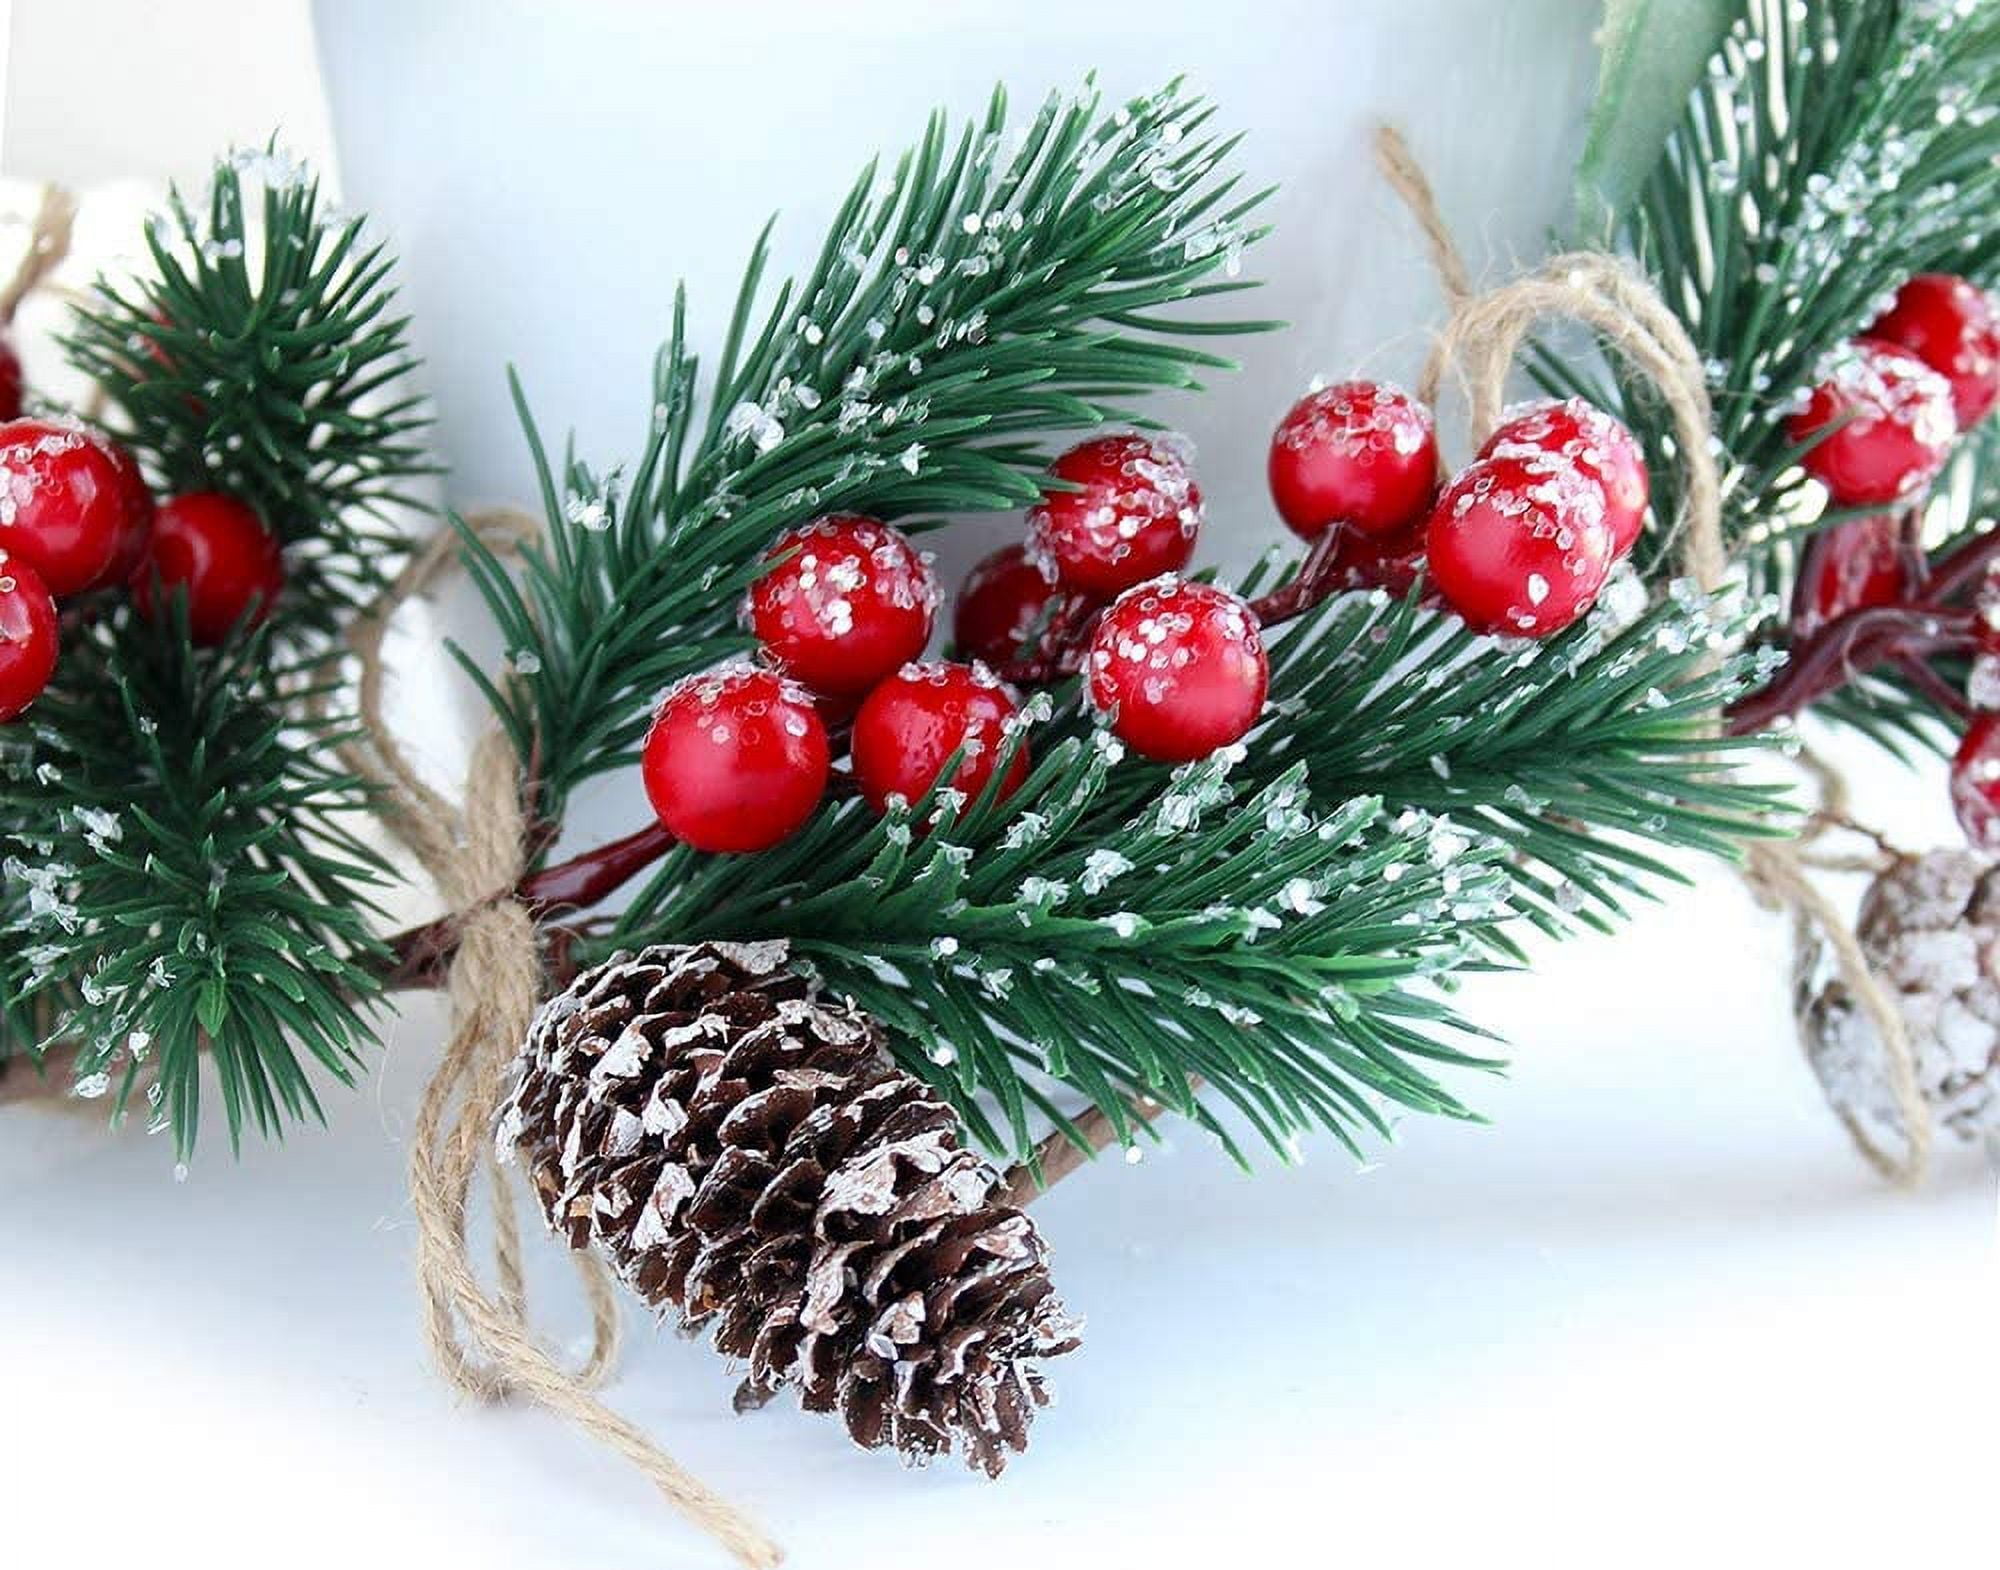 WSFSLJWDW 10pcs Christmas Berries Red Stems Evergreen Pine Branches, Snow Flocked Red Holly Berry Pine Cone Floral Sprays Decoration,Winter Holiday